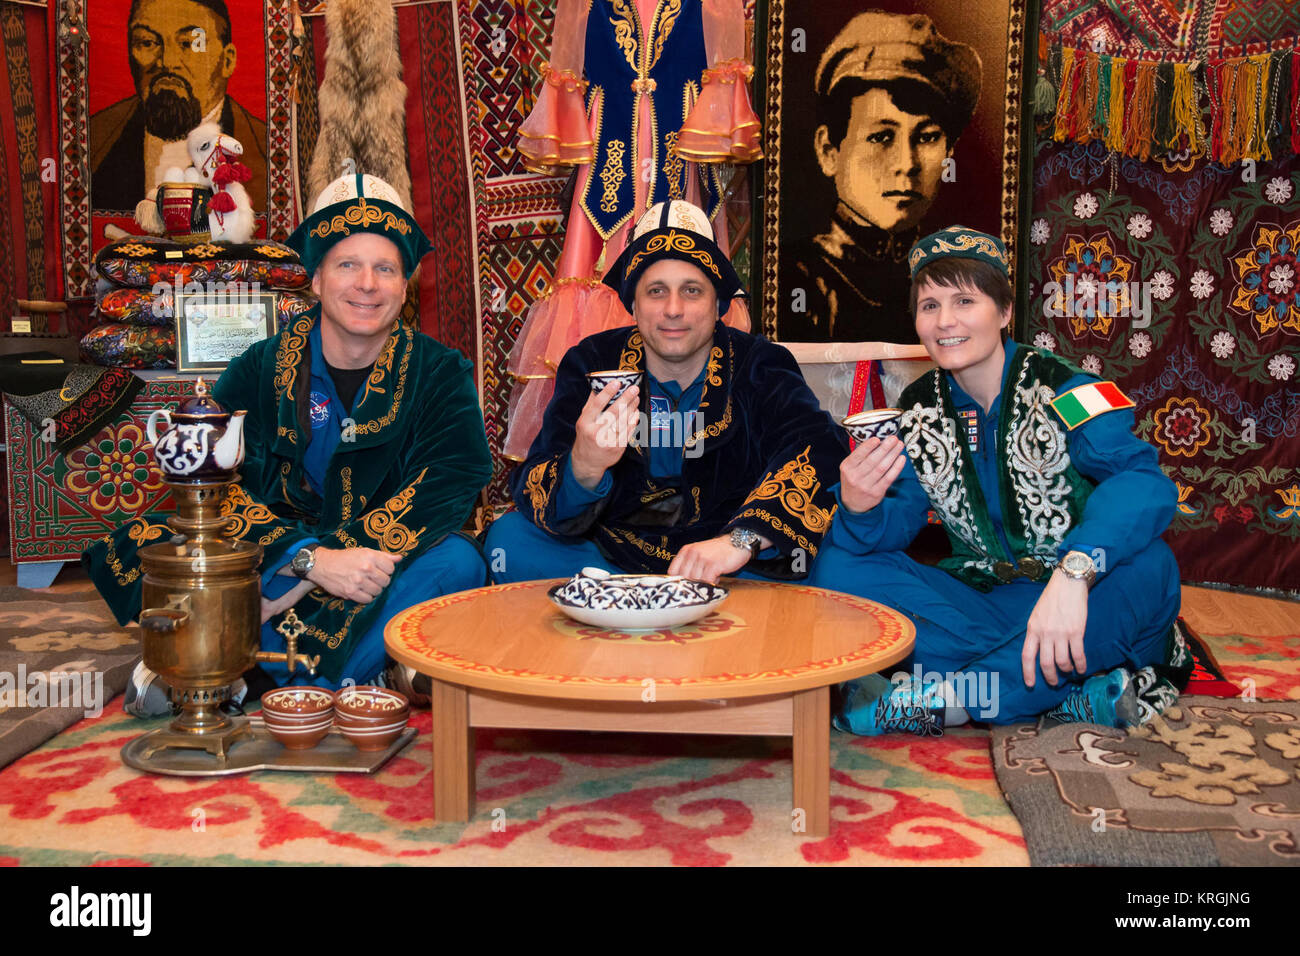 13-43-56-2:  In the town of Baikonur, Kazakhstan, Expedition 40/41 backup crewmembers Terry Virts of NASA (left), Anton Shkaplerov of the Russian Federal Space Agency (Roscosmos, center) and Samantha Cristoforetti of the European Space Agency (right) partake in a traditional Kazakh ceremony May 17 in a “yurt”, or tent, during a tour of the community. The trio is backing up the prime crew, Flight Engineer Alexander Gerst of the European Space Agency, Soyuz Commander Max Suraev of the Russian Federal Space Agency (Roscosmos) and NASA Flight Engineer Reid Wiseman, who will launch from Baikonur on Stock Photo